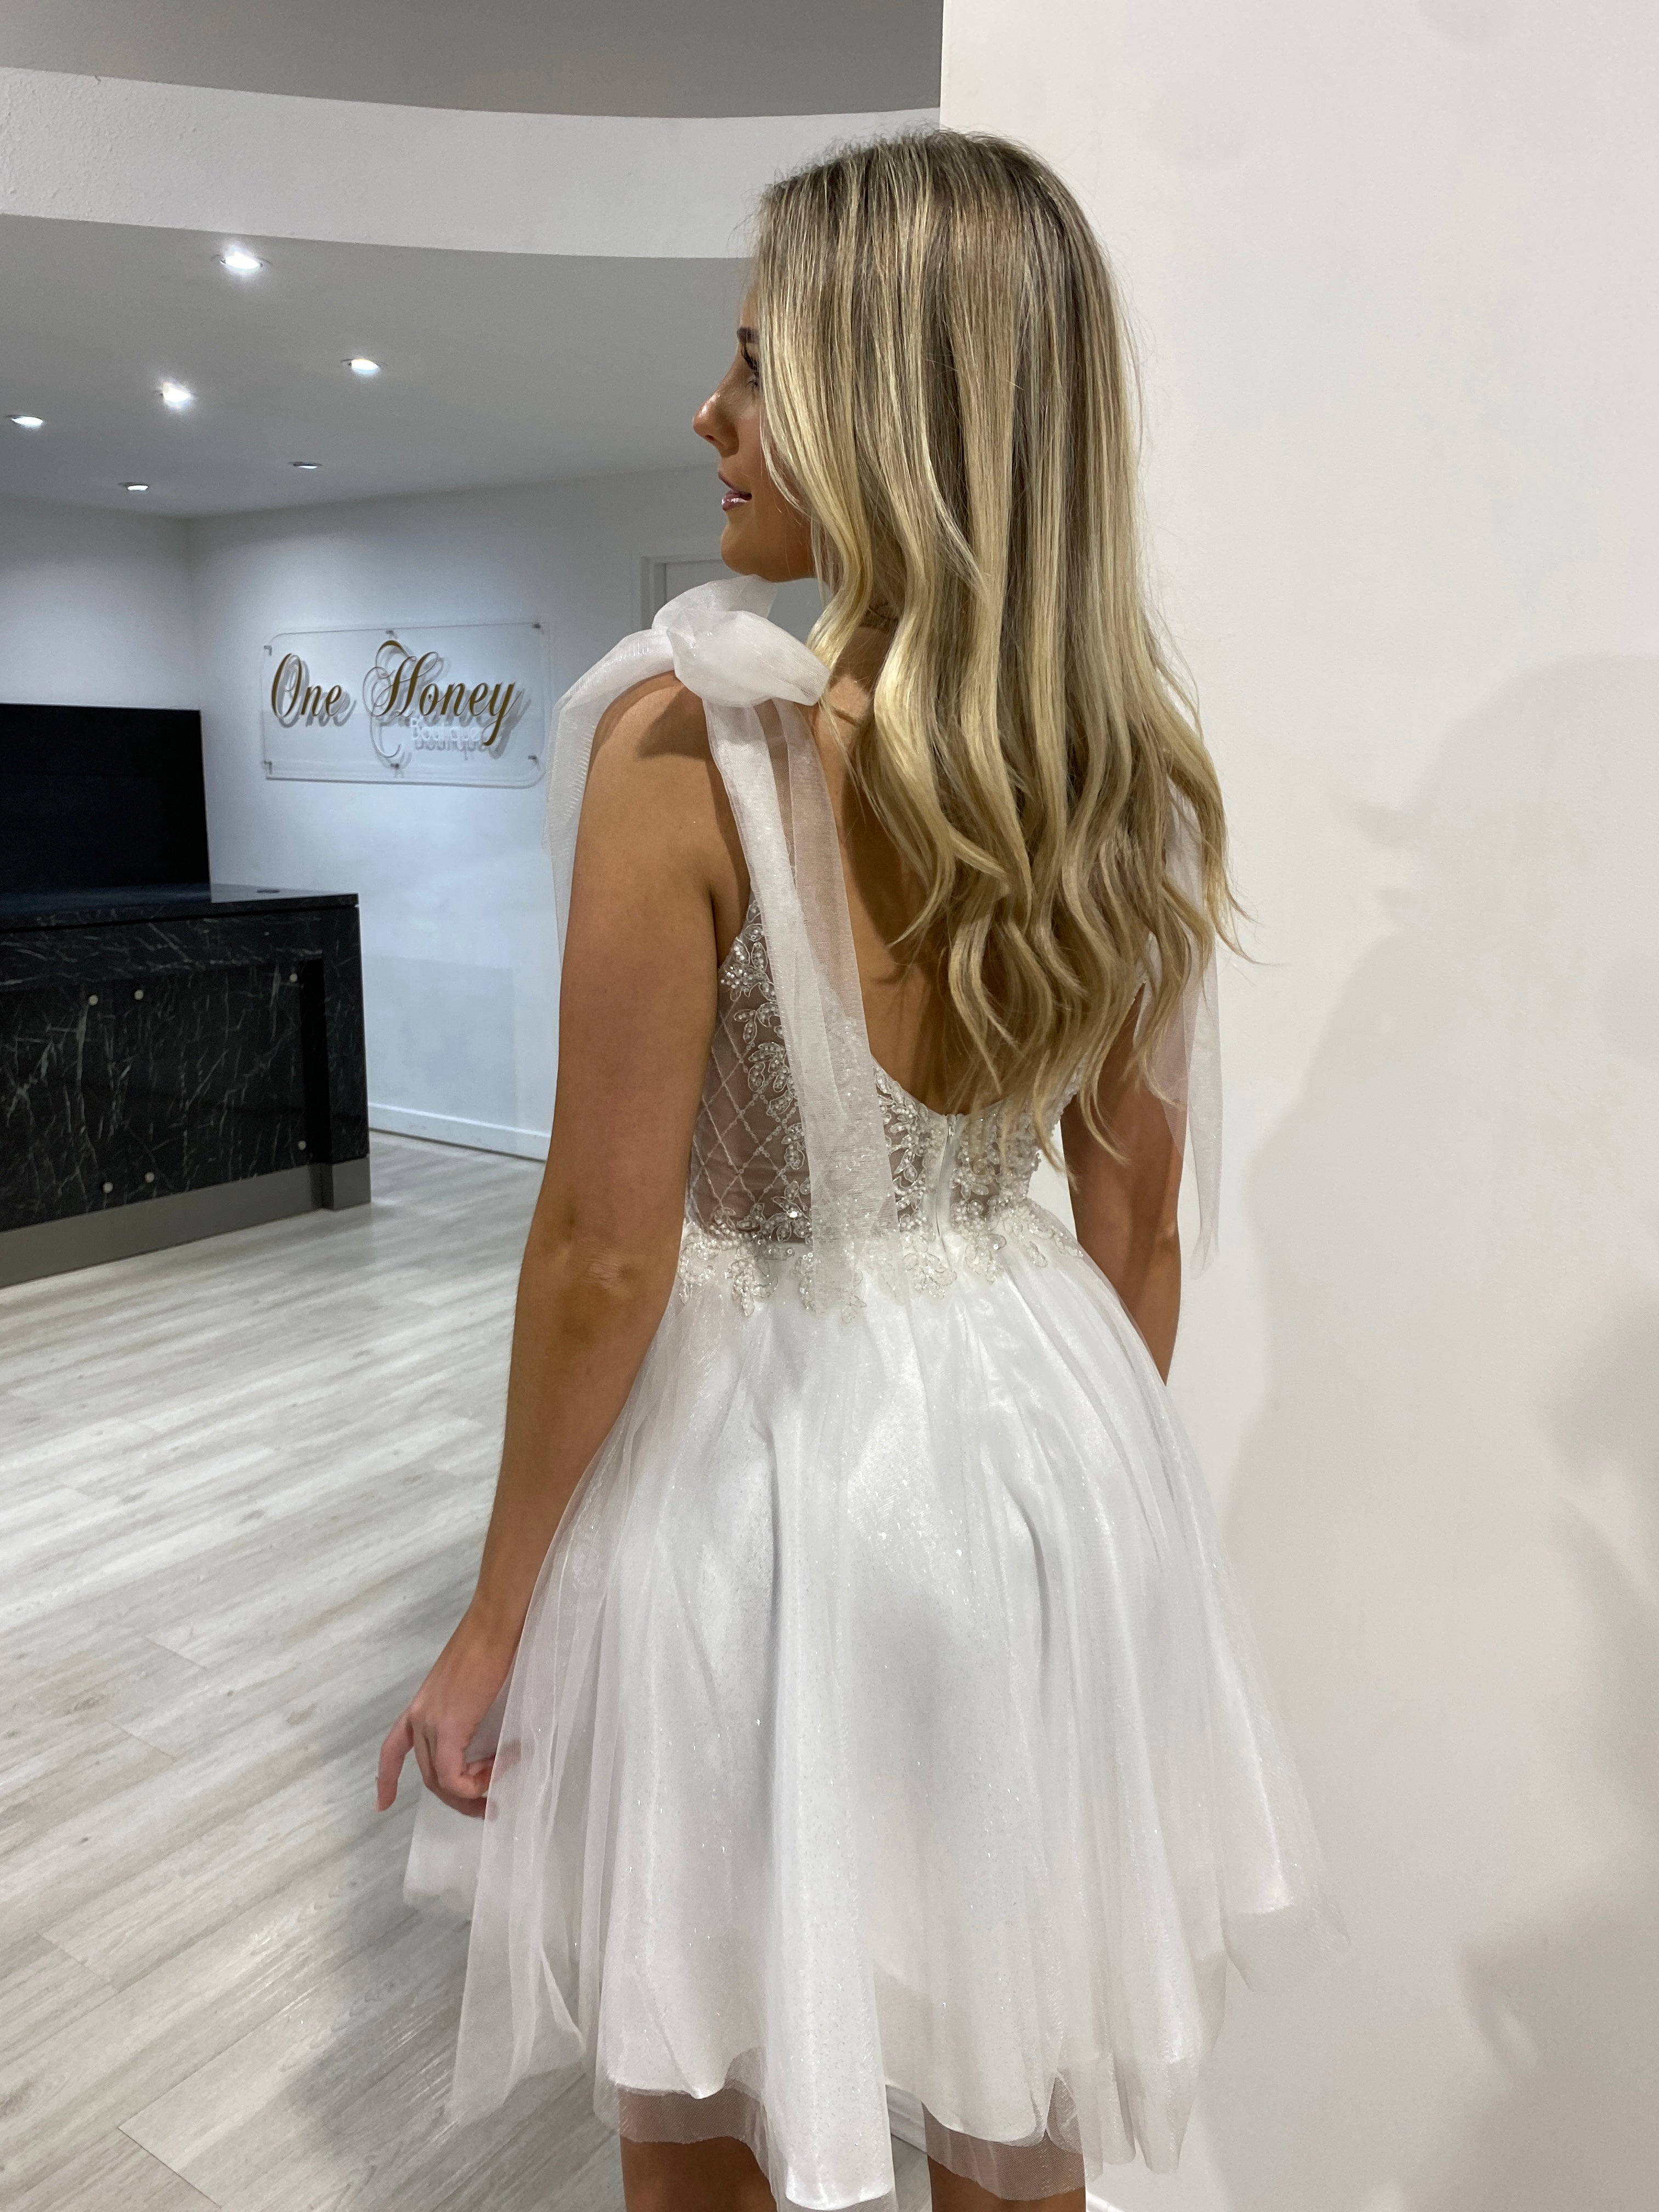 Honey Couture DALPHINE White Sequin Lace Tulle Frilly Party Dress